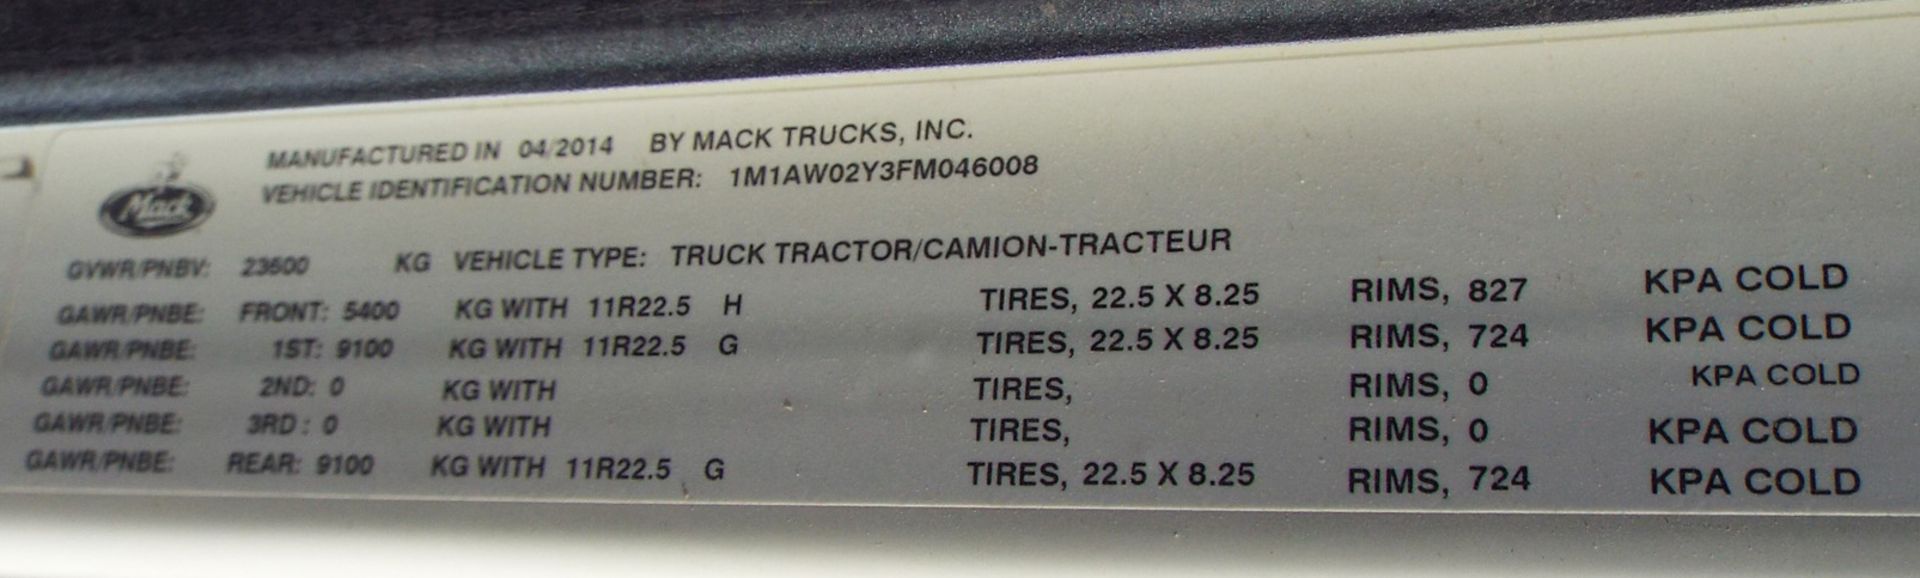 MACK (2015) CXU613 DAY CAB TRUCK WITH 405HP MP7 DIESEL ENGINE, 10 SPEED EATON FULLER TRANSMISSION, - Image 12 of 13